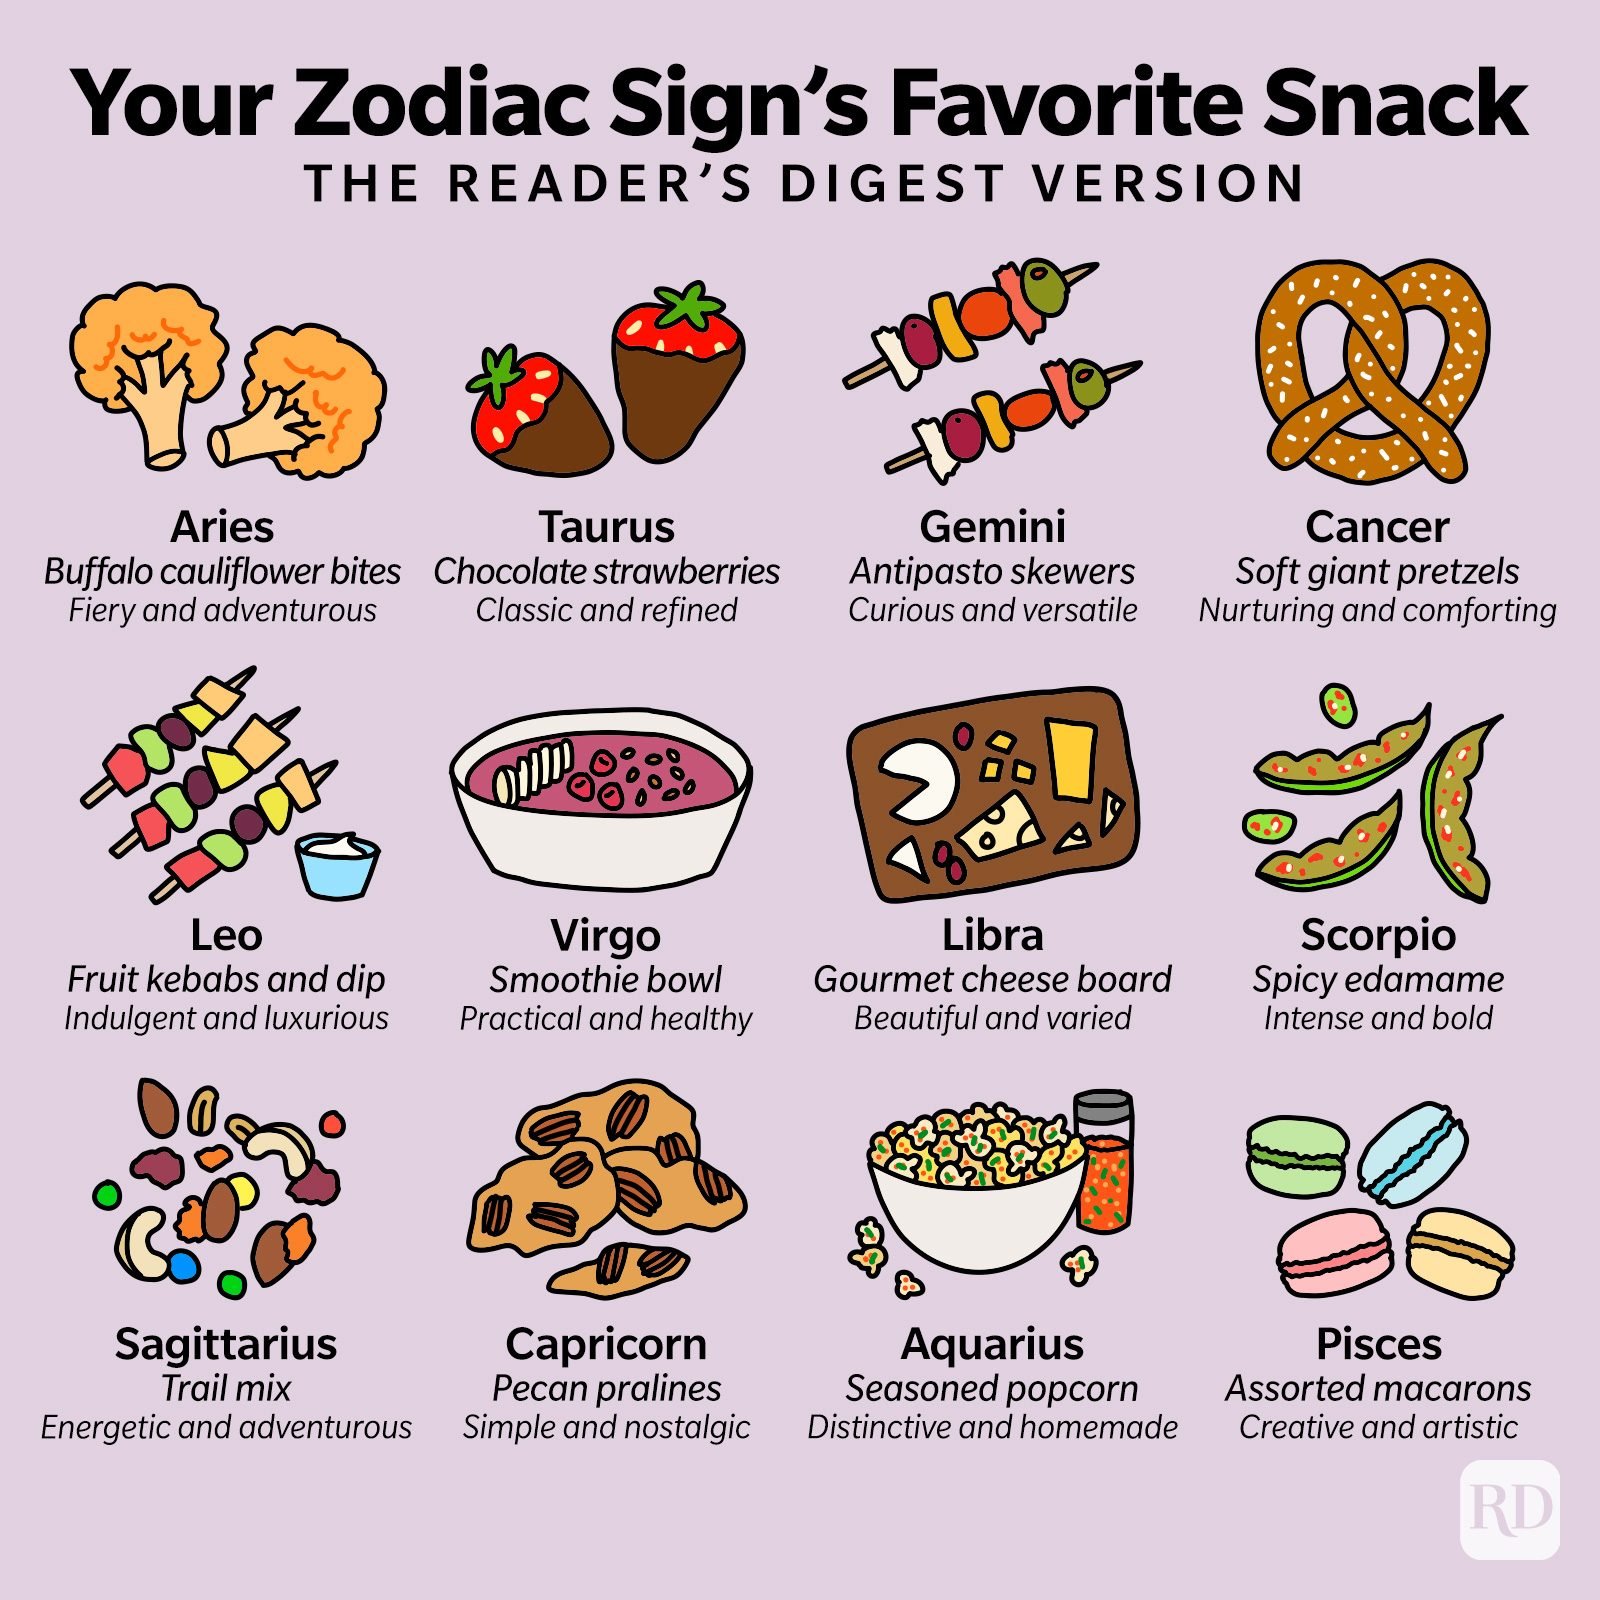 The Best Snack for You, Based on Your Zodiac Sign